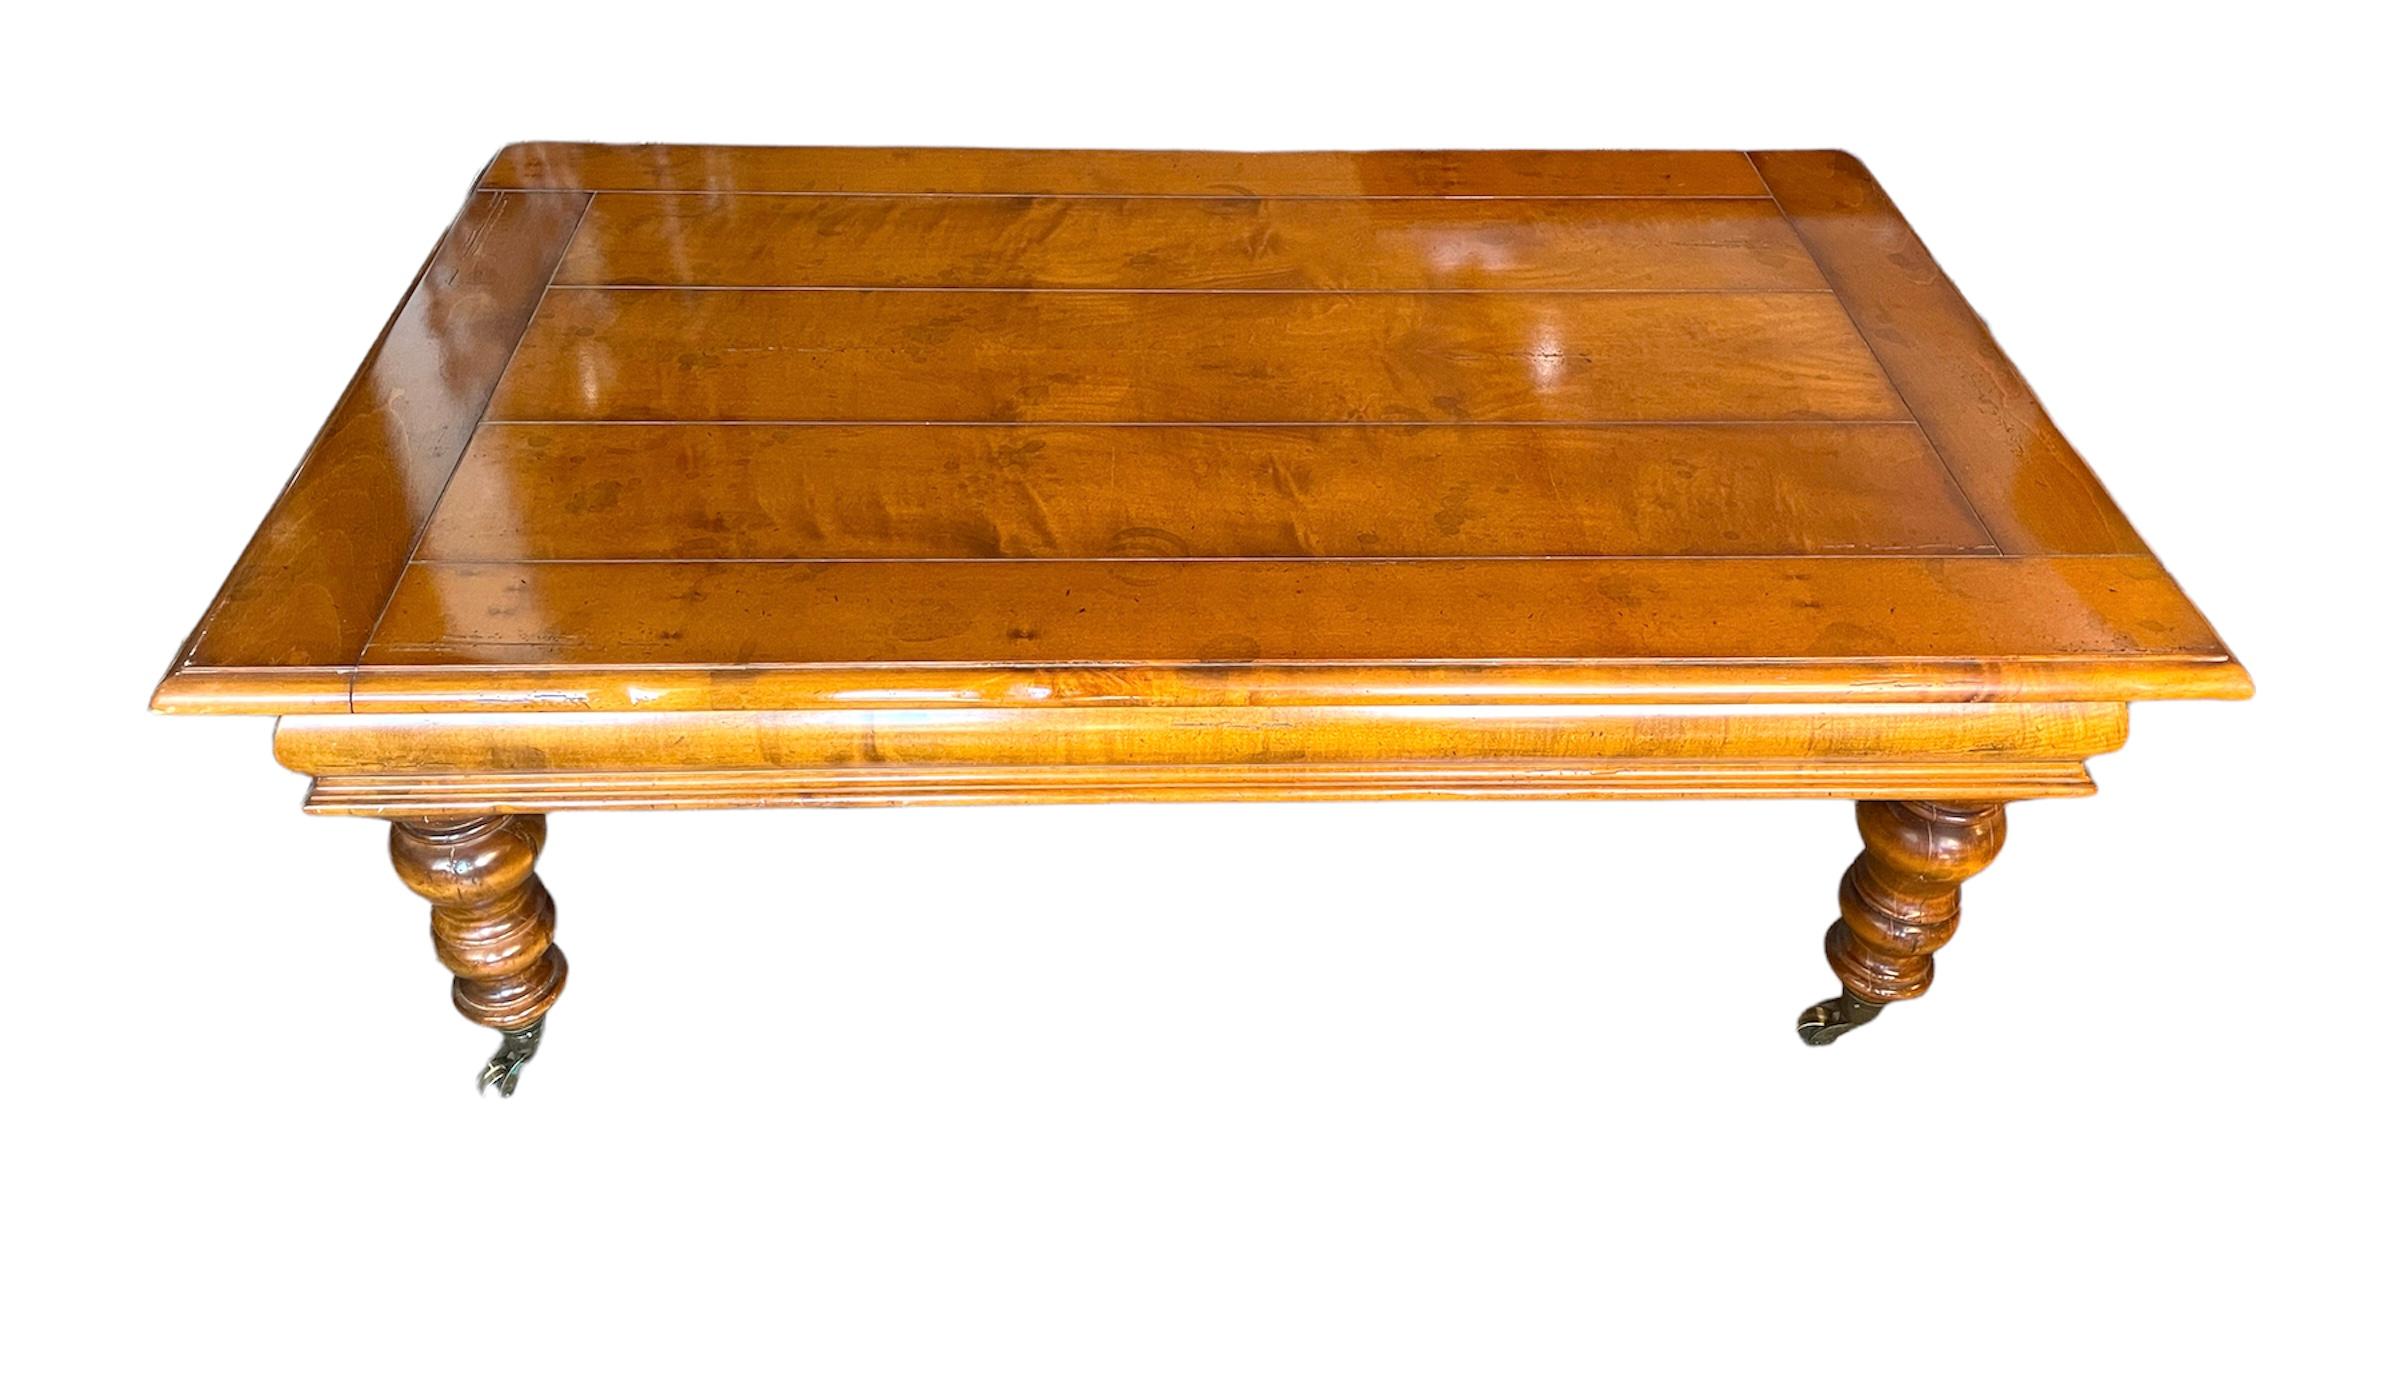 Itailian maple coffee table by Milling Road for Baker Furniture on wheels that function well, solid and aged gracefully- see photos for soft glass rings  but blend in the age of the table quite well.